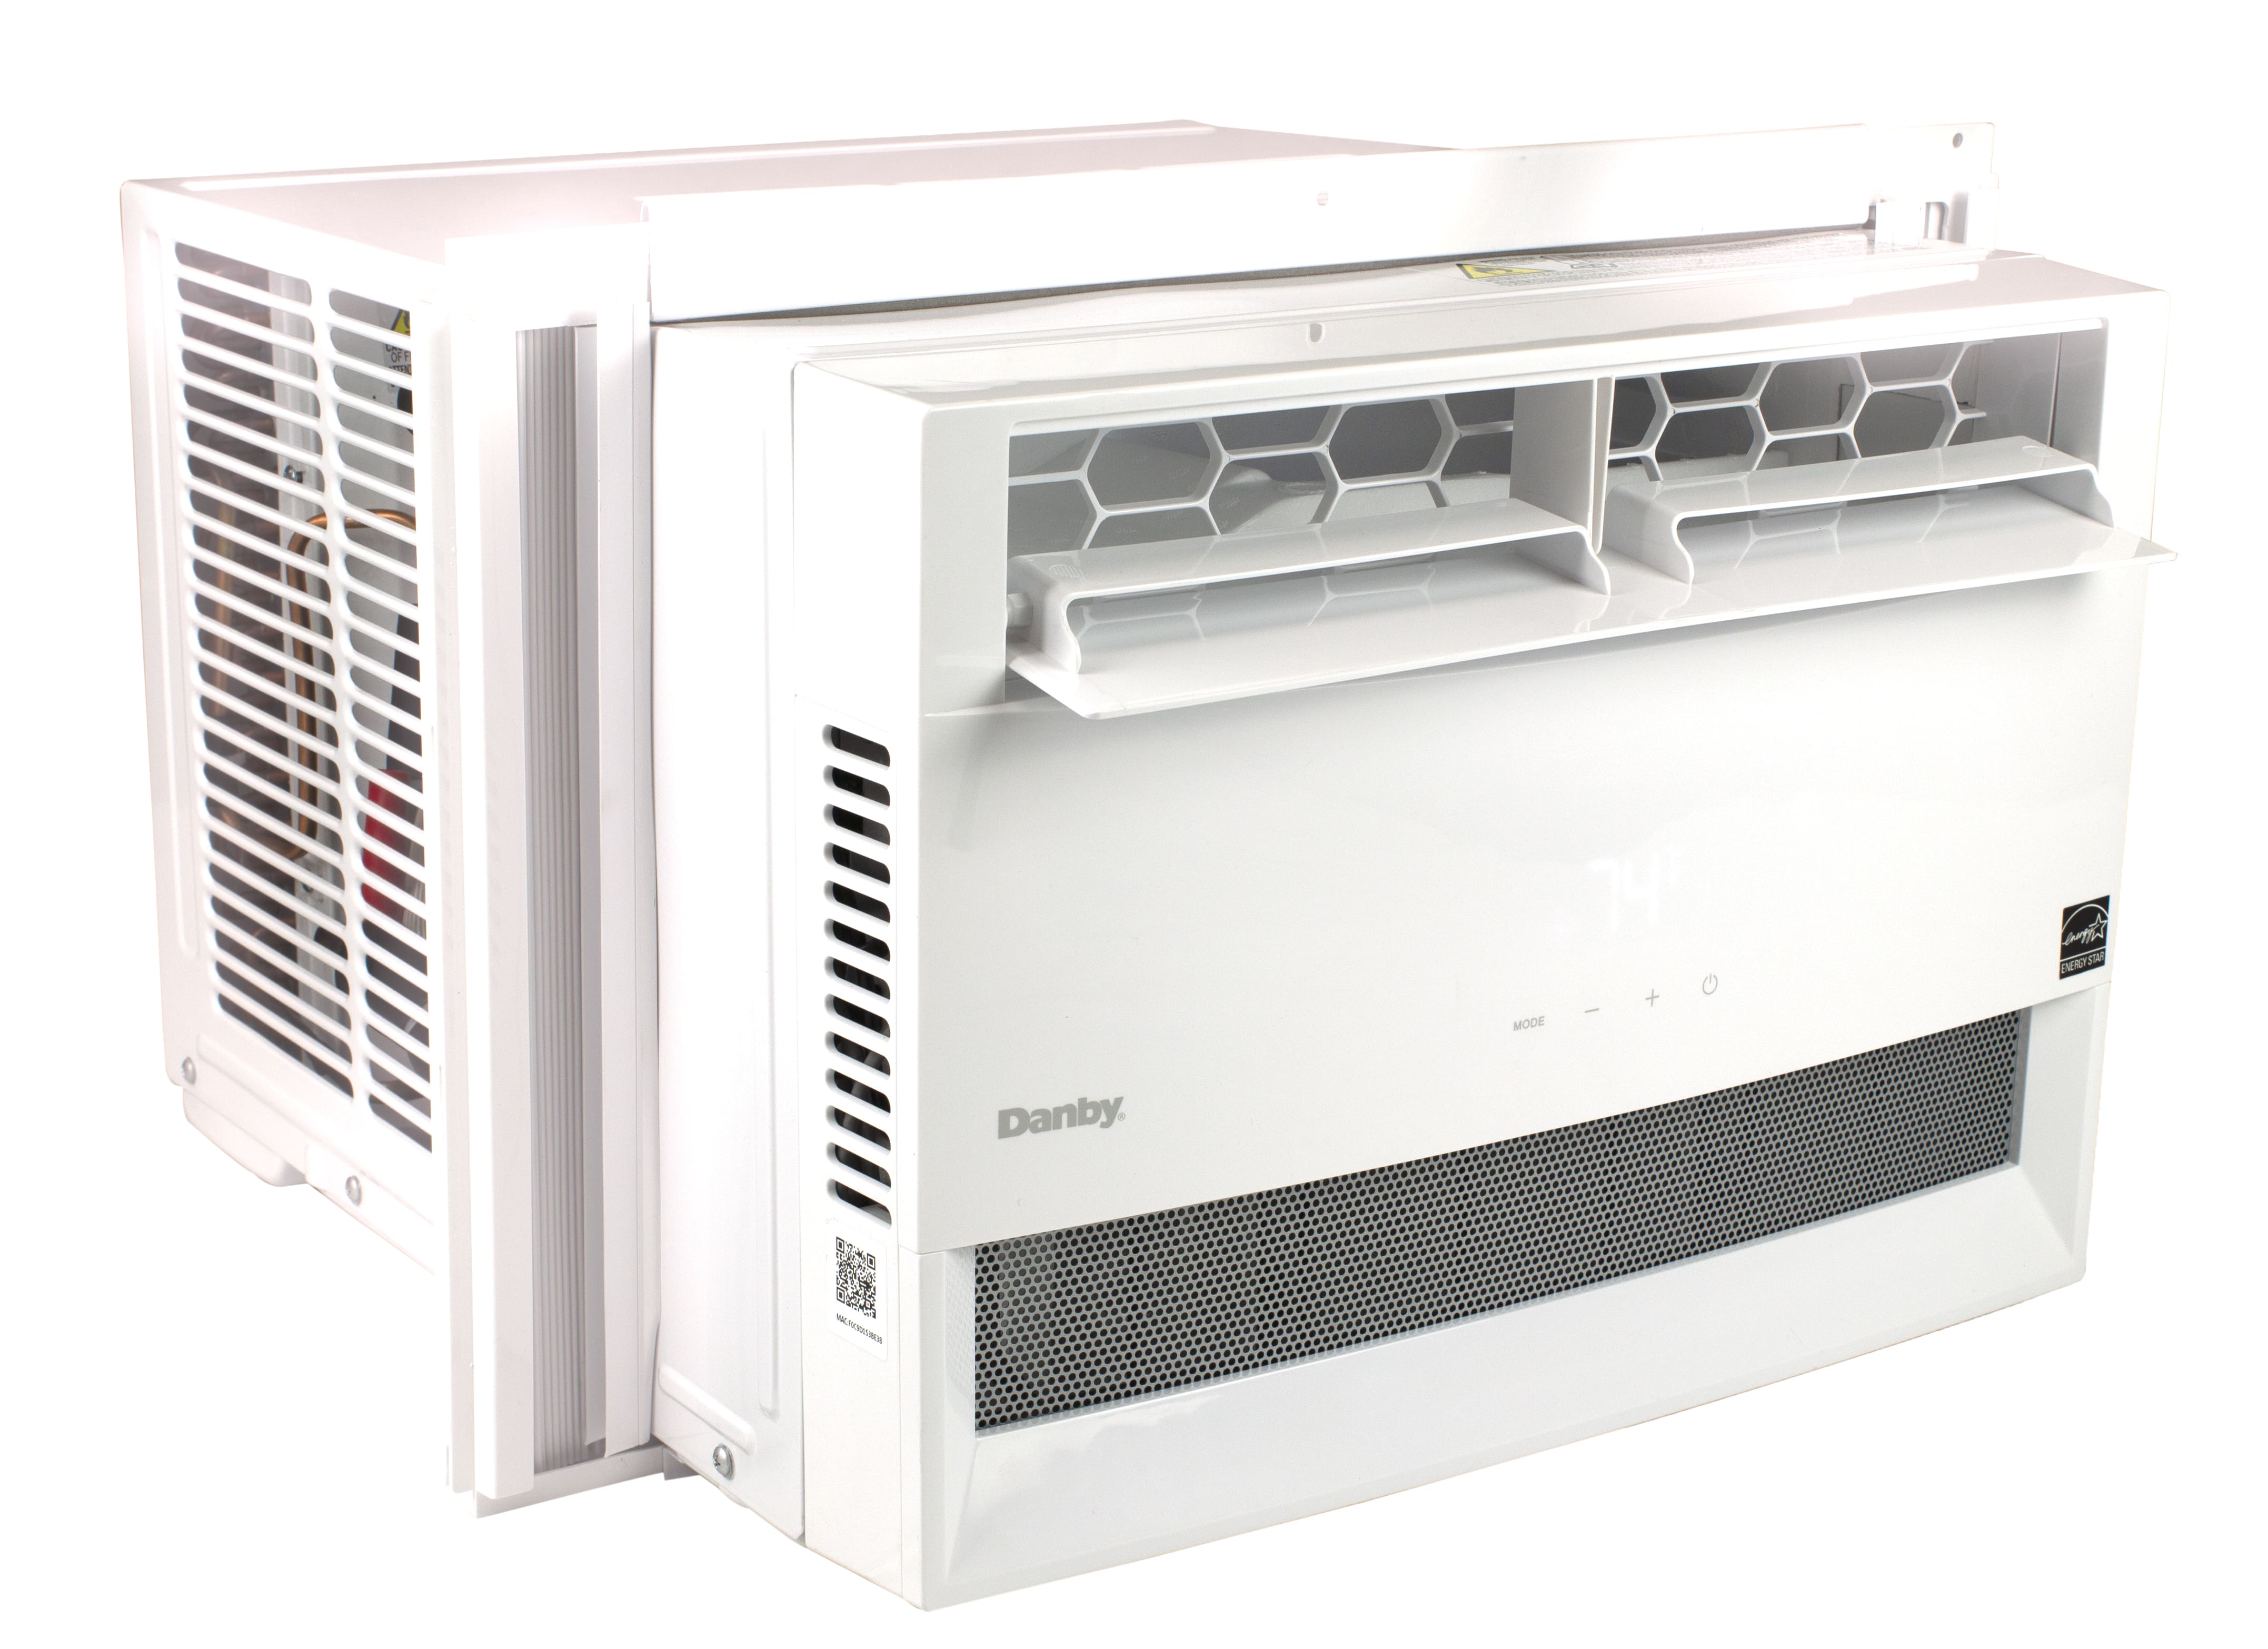 Danby 10,000 BTU Window Air Conditioner with Wireless Connect